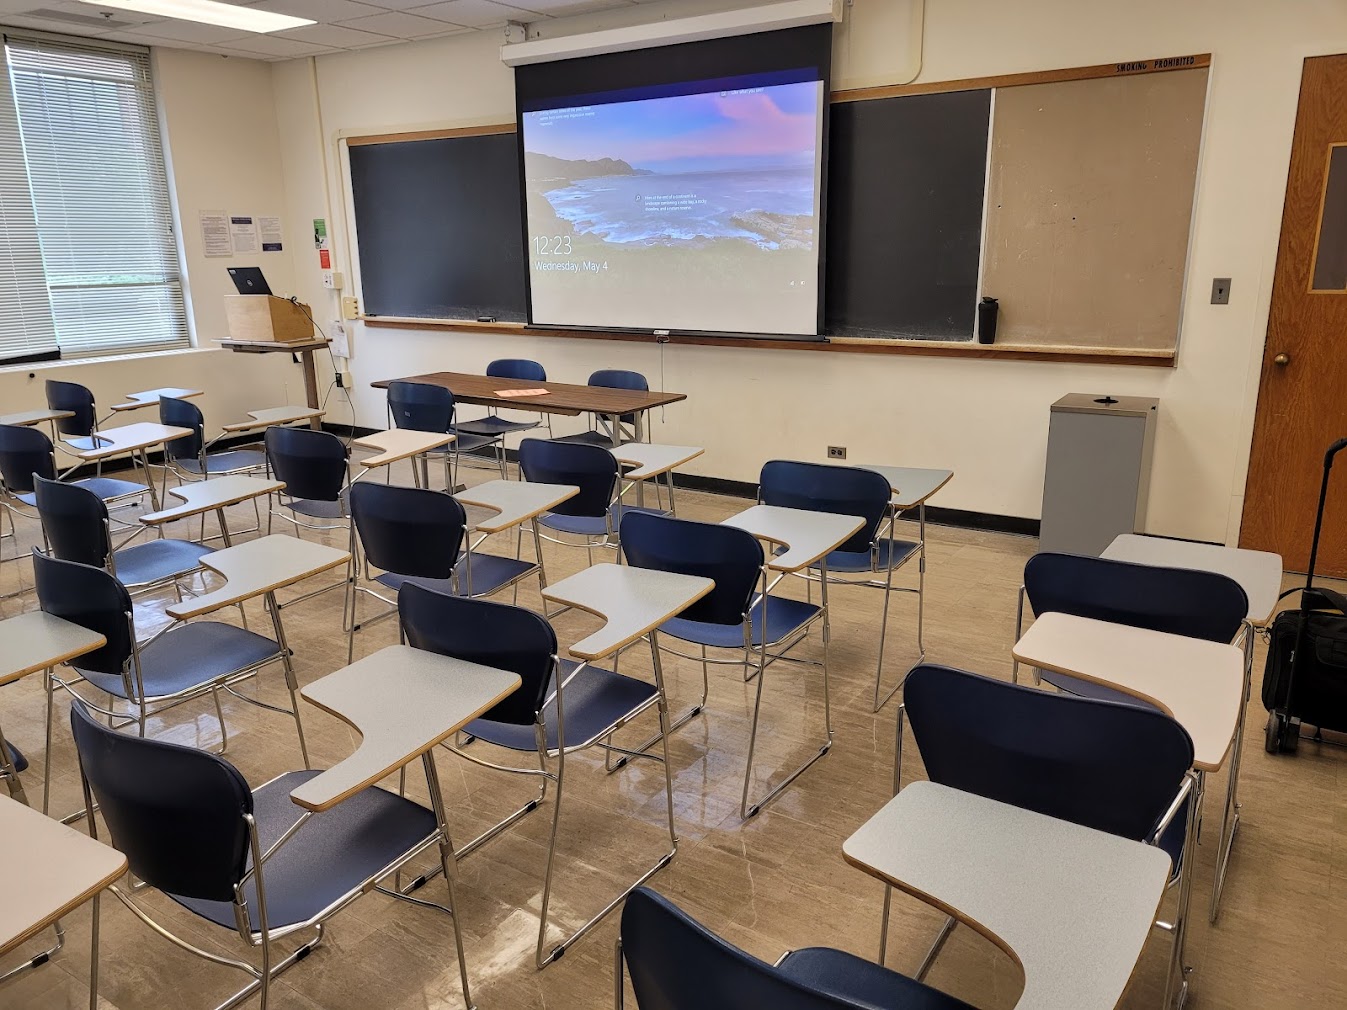 A view of the classroom with fixed tableted arm chairs and instructor table in front.